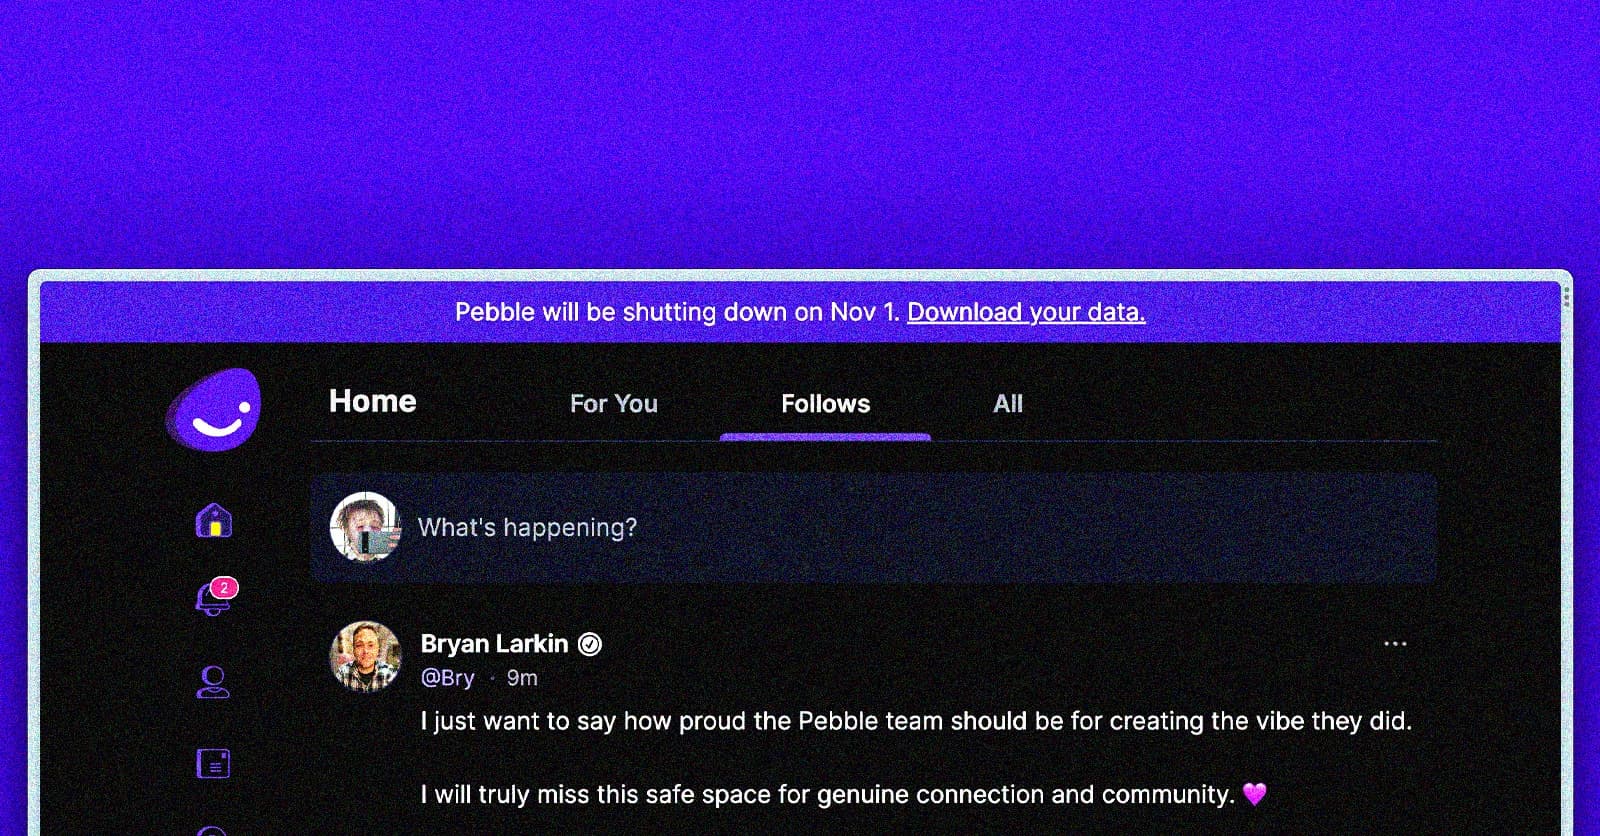 A screenshot of the Pebble web app, featuring the message Pebble will be shutting down Nov 1 as a prominent banner. Below, @bry says I just want to say how proud the Pebble team should be for creating the vibe they did.